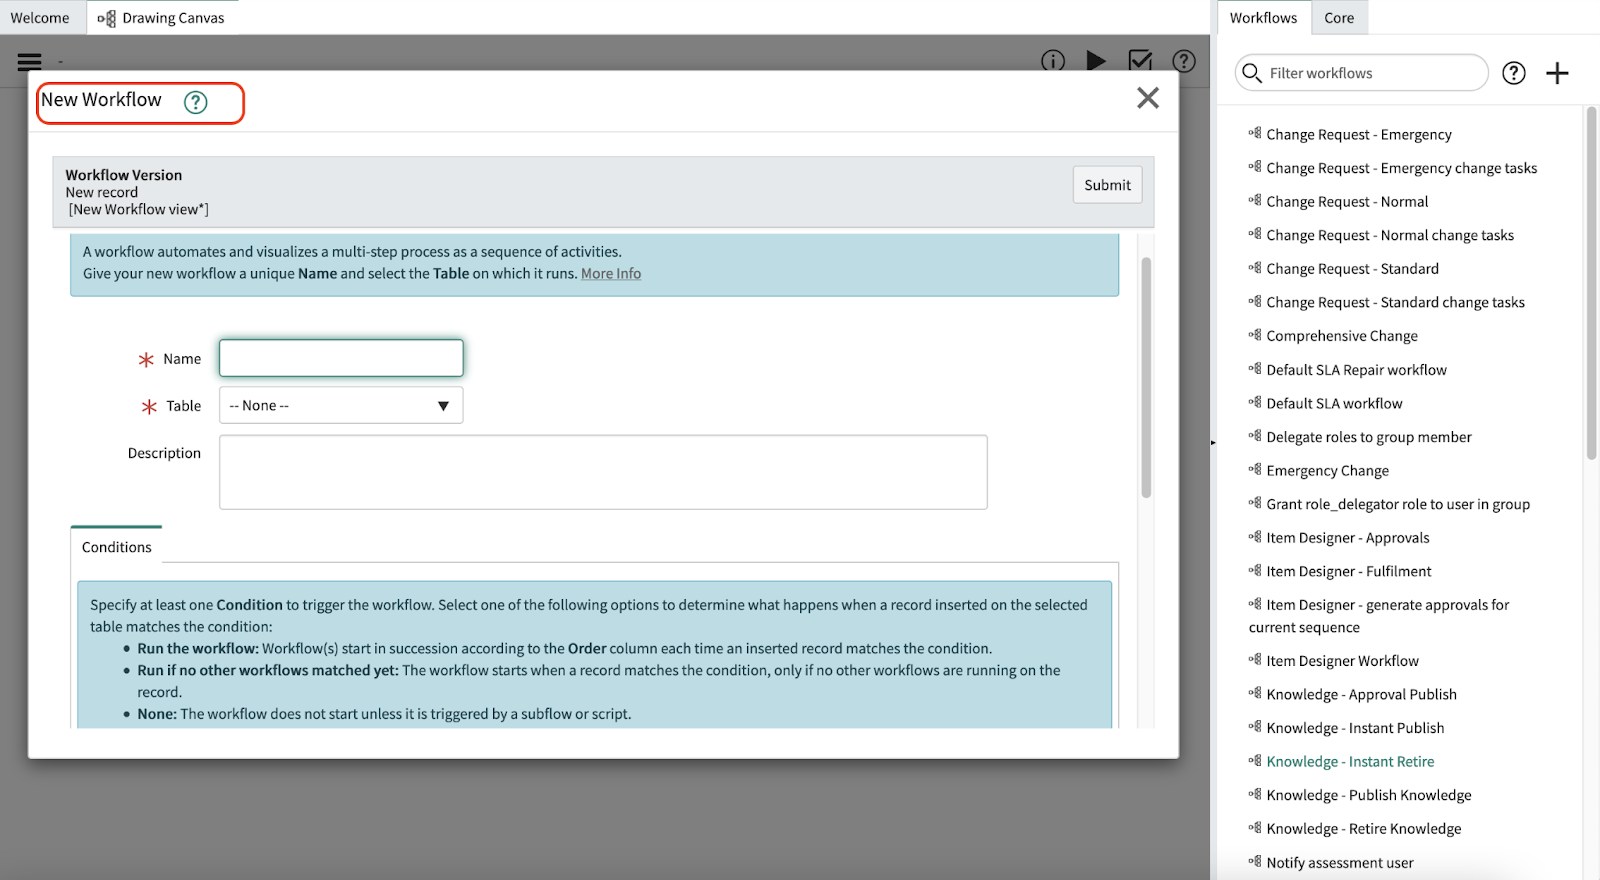 A screenshot of the New Workflow window that appears in the ServiceNow dashboard